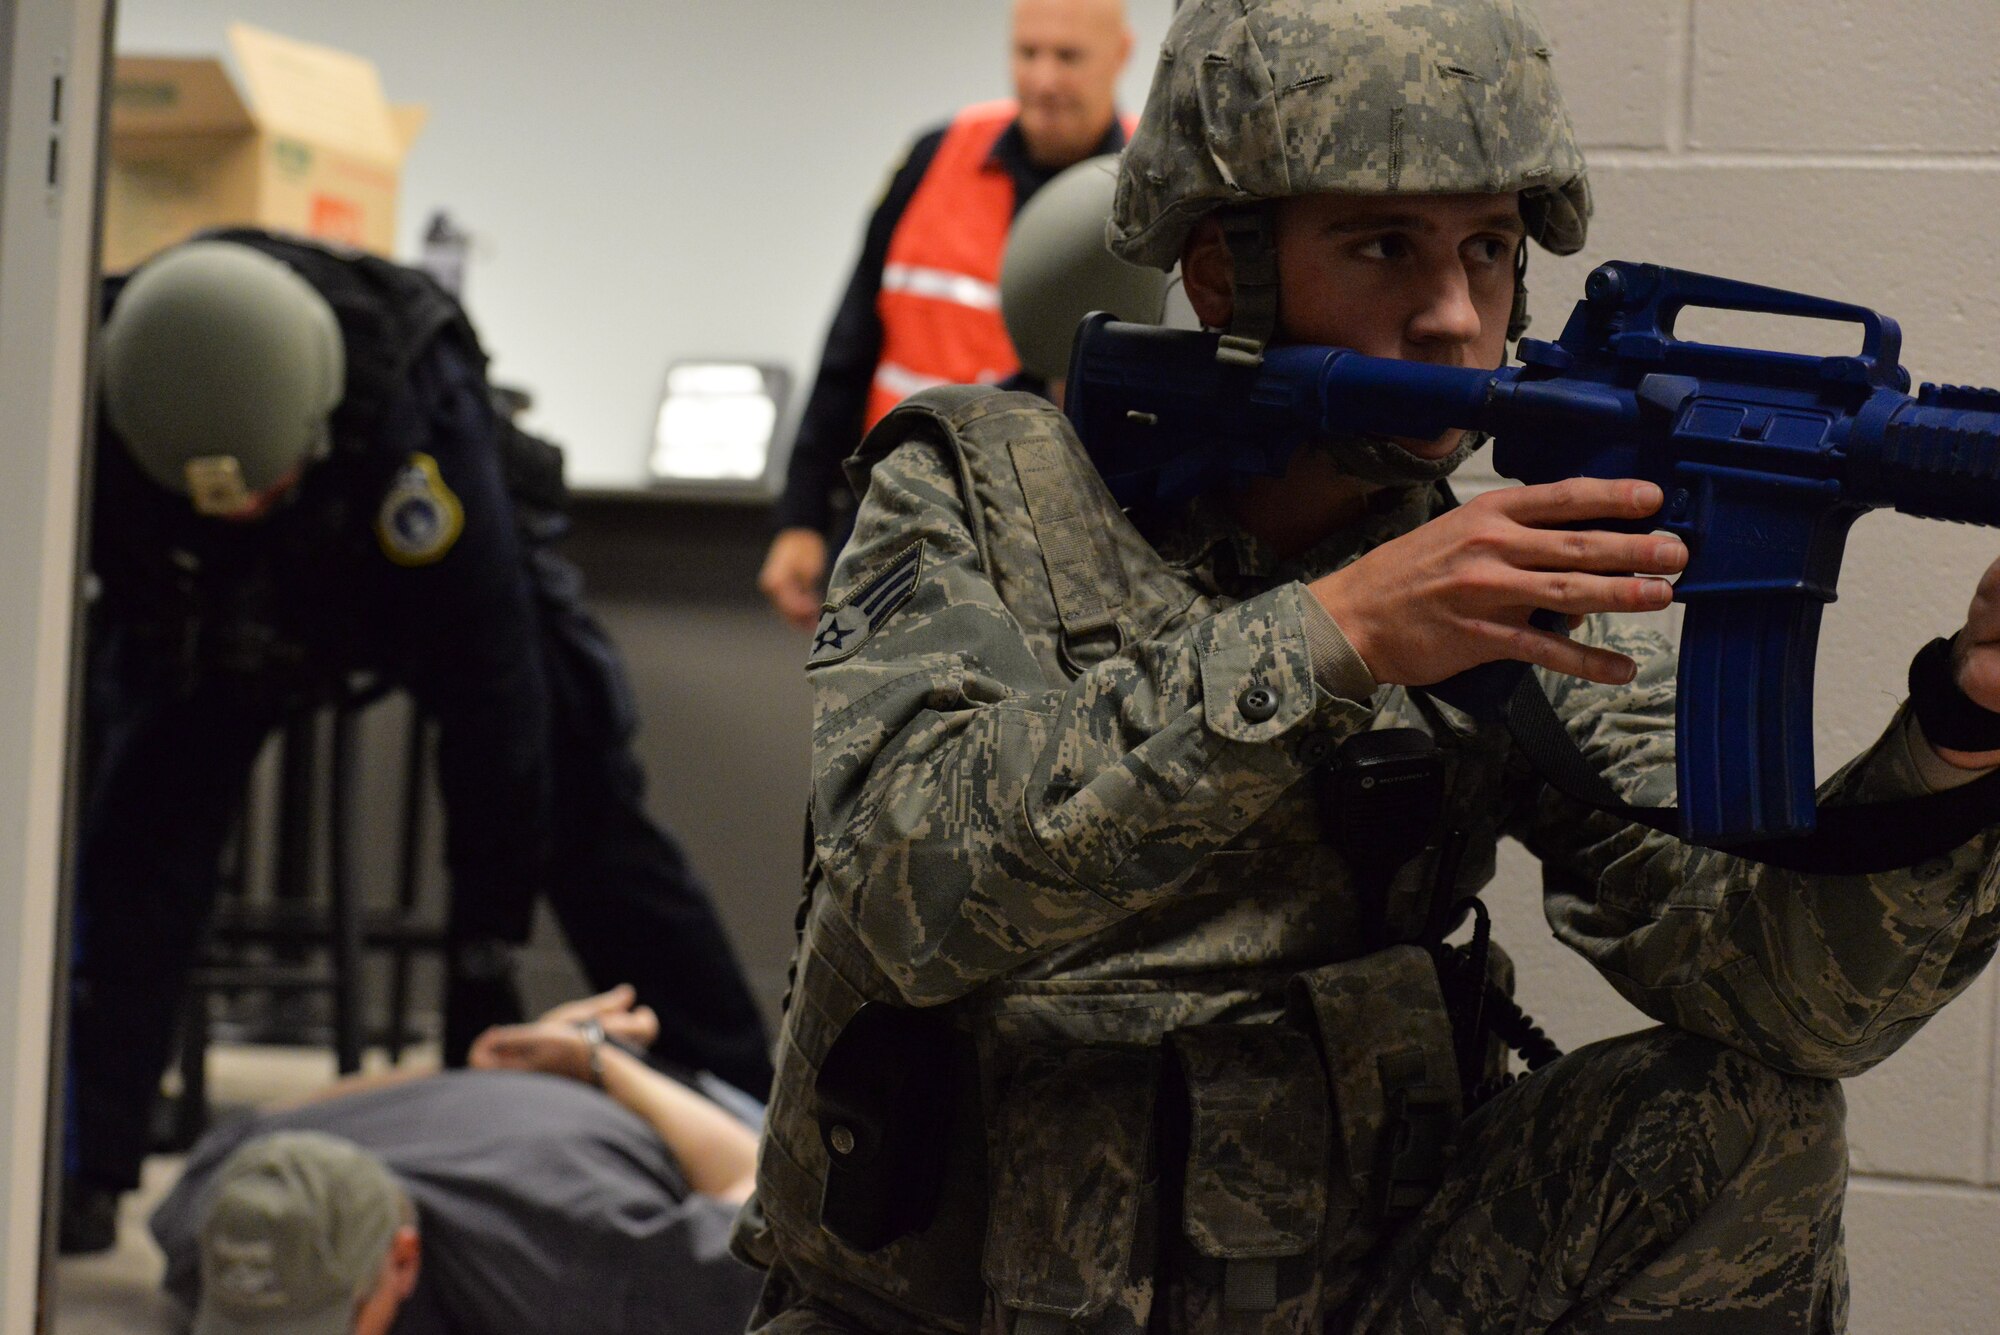 Senior Airman Brennan Sokowoski (right), 88th Security Force member, stands guard while Police Officer James Lawrence, 88th Security Forces, takes down the active shooter, played by Senior Master Sgt. Robert Welshhans Jr., 445th Airlift Wing Inspector General, during an active-shooter exercise Nov. 5 at Wright-Patterson Air Force Base. (U.S. Air Force photo / Michelle Gigante)